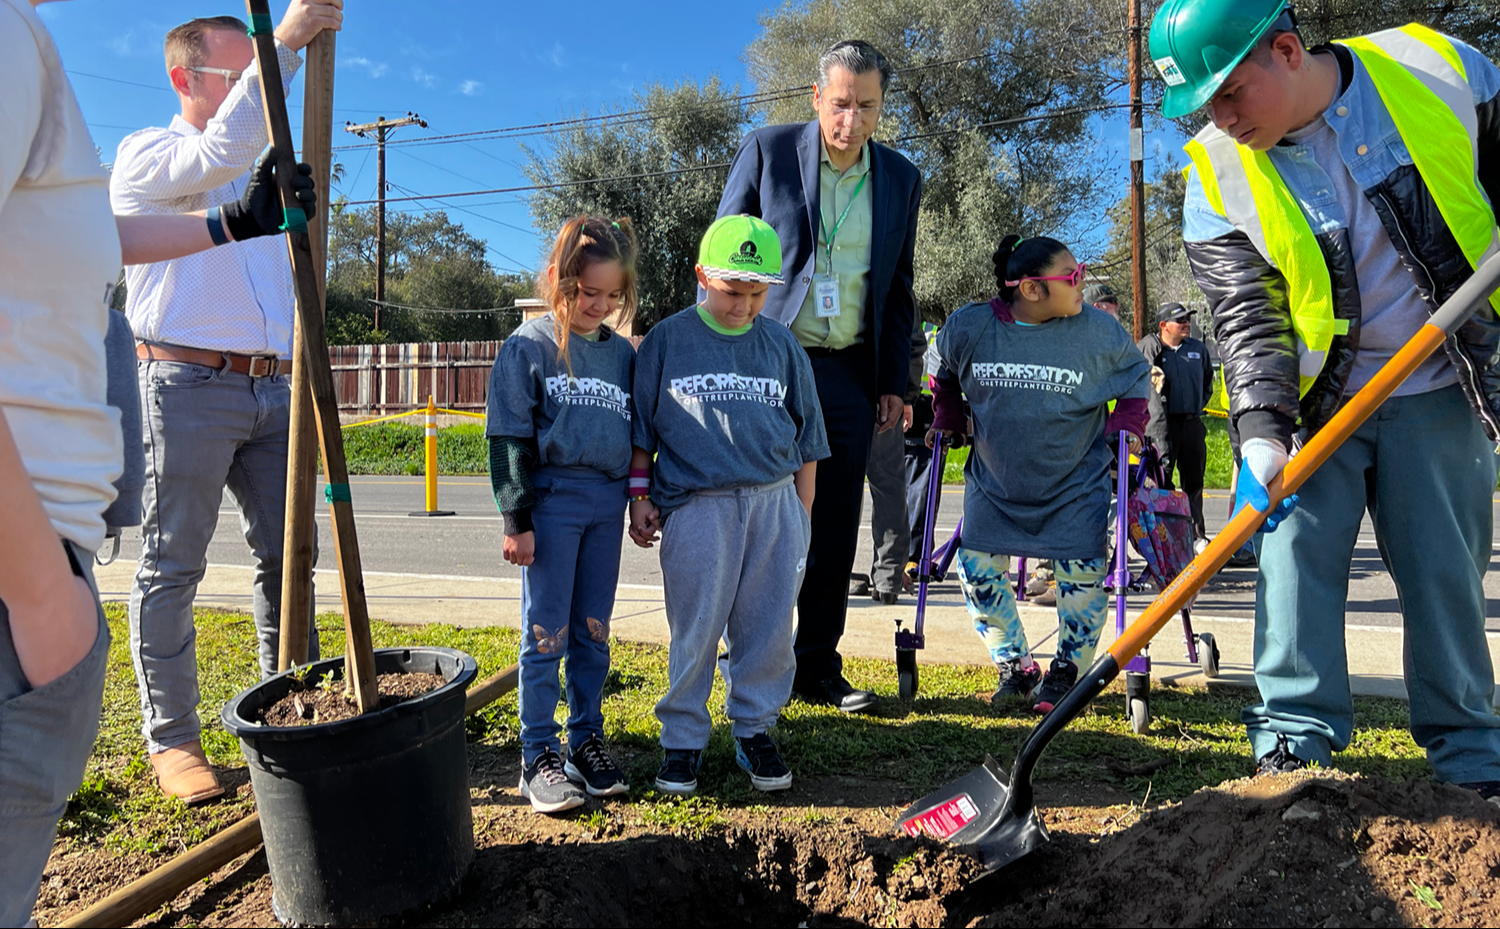 Tree planting at Rock Springs Elementary with students watching the workers shovel dirt.